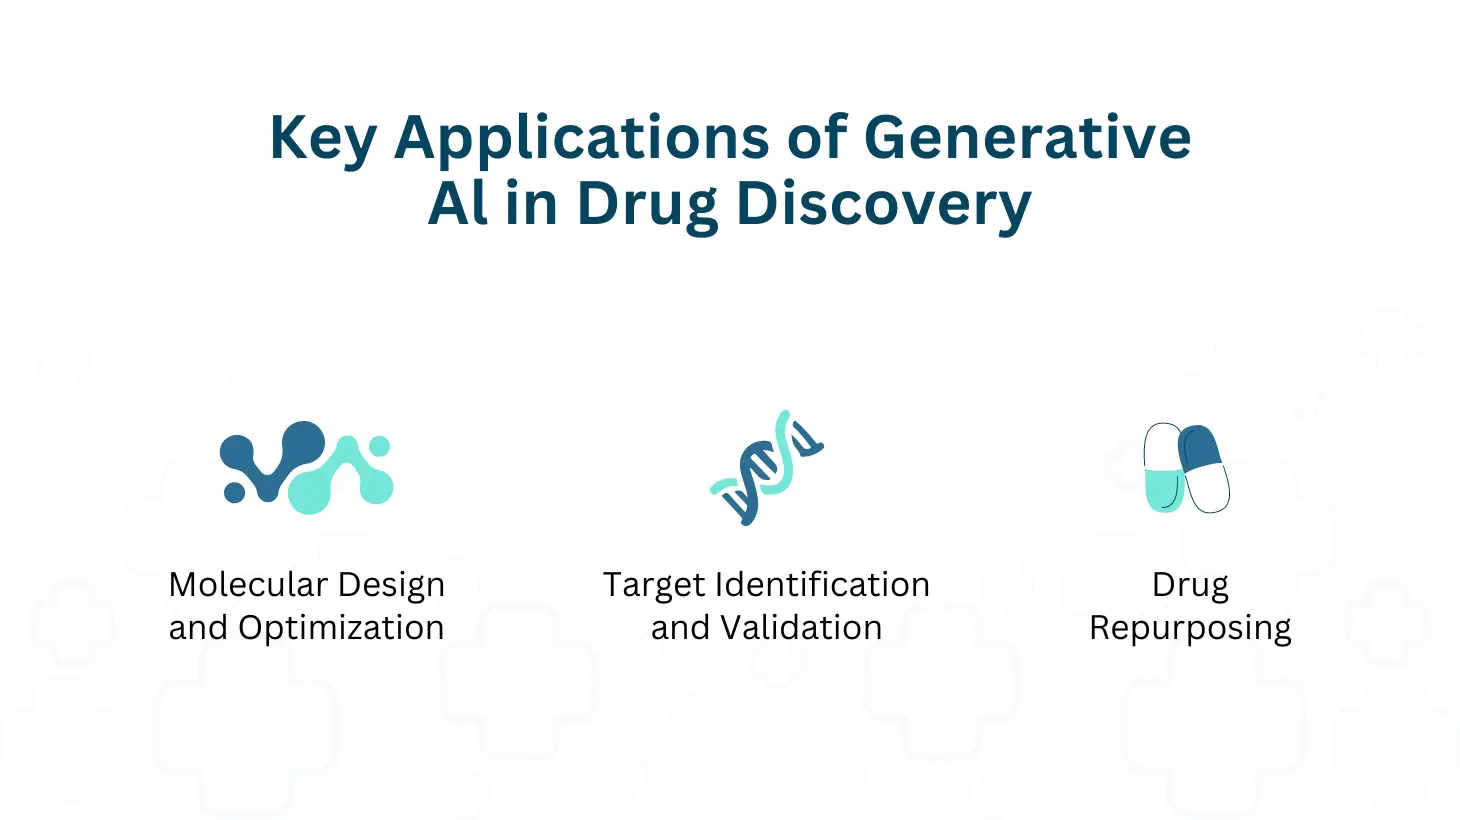 Key applications of generative AI in drug discovery.